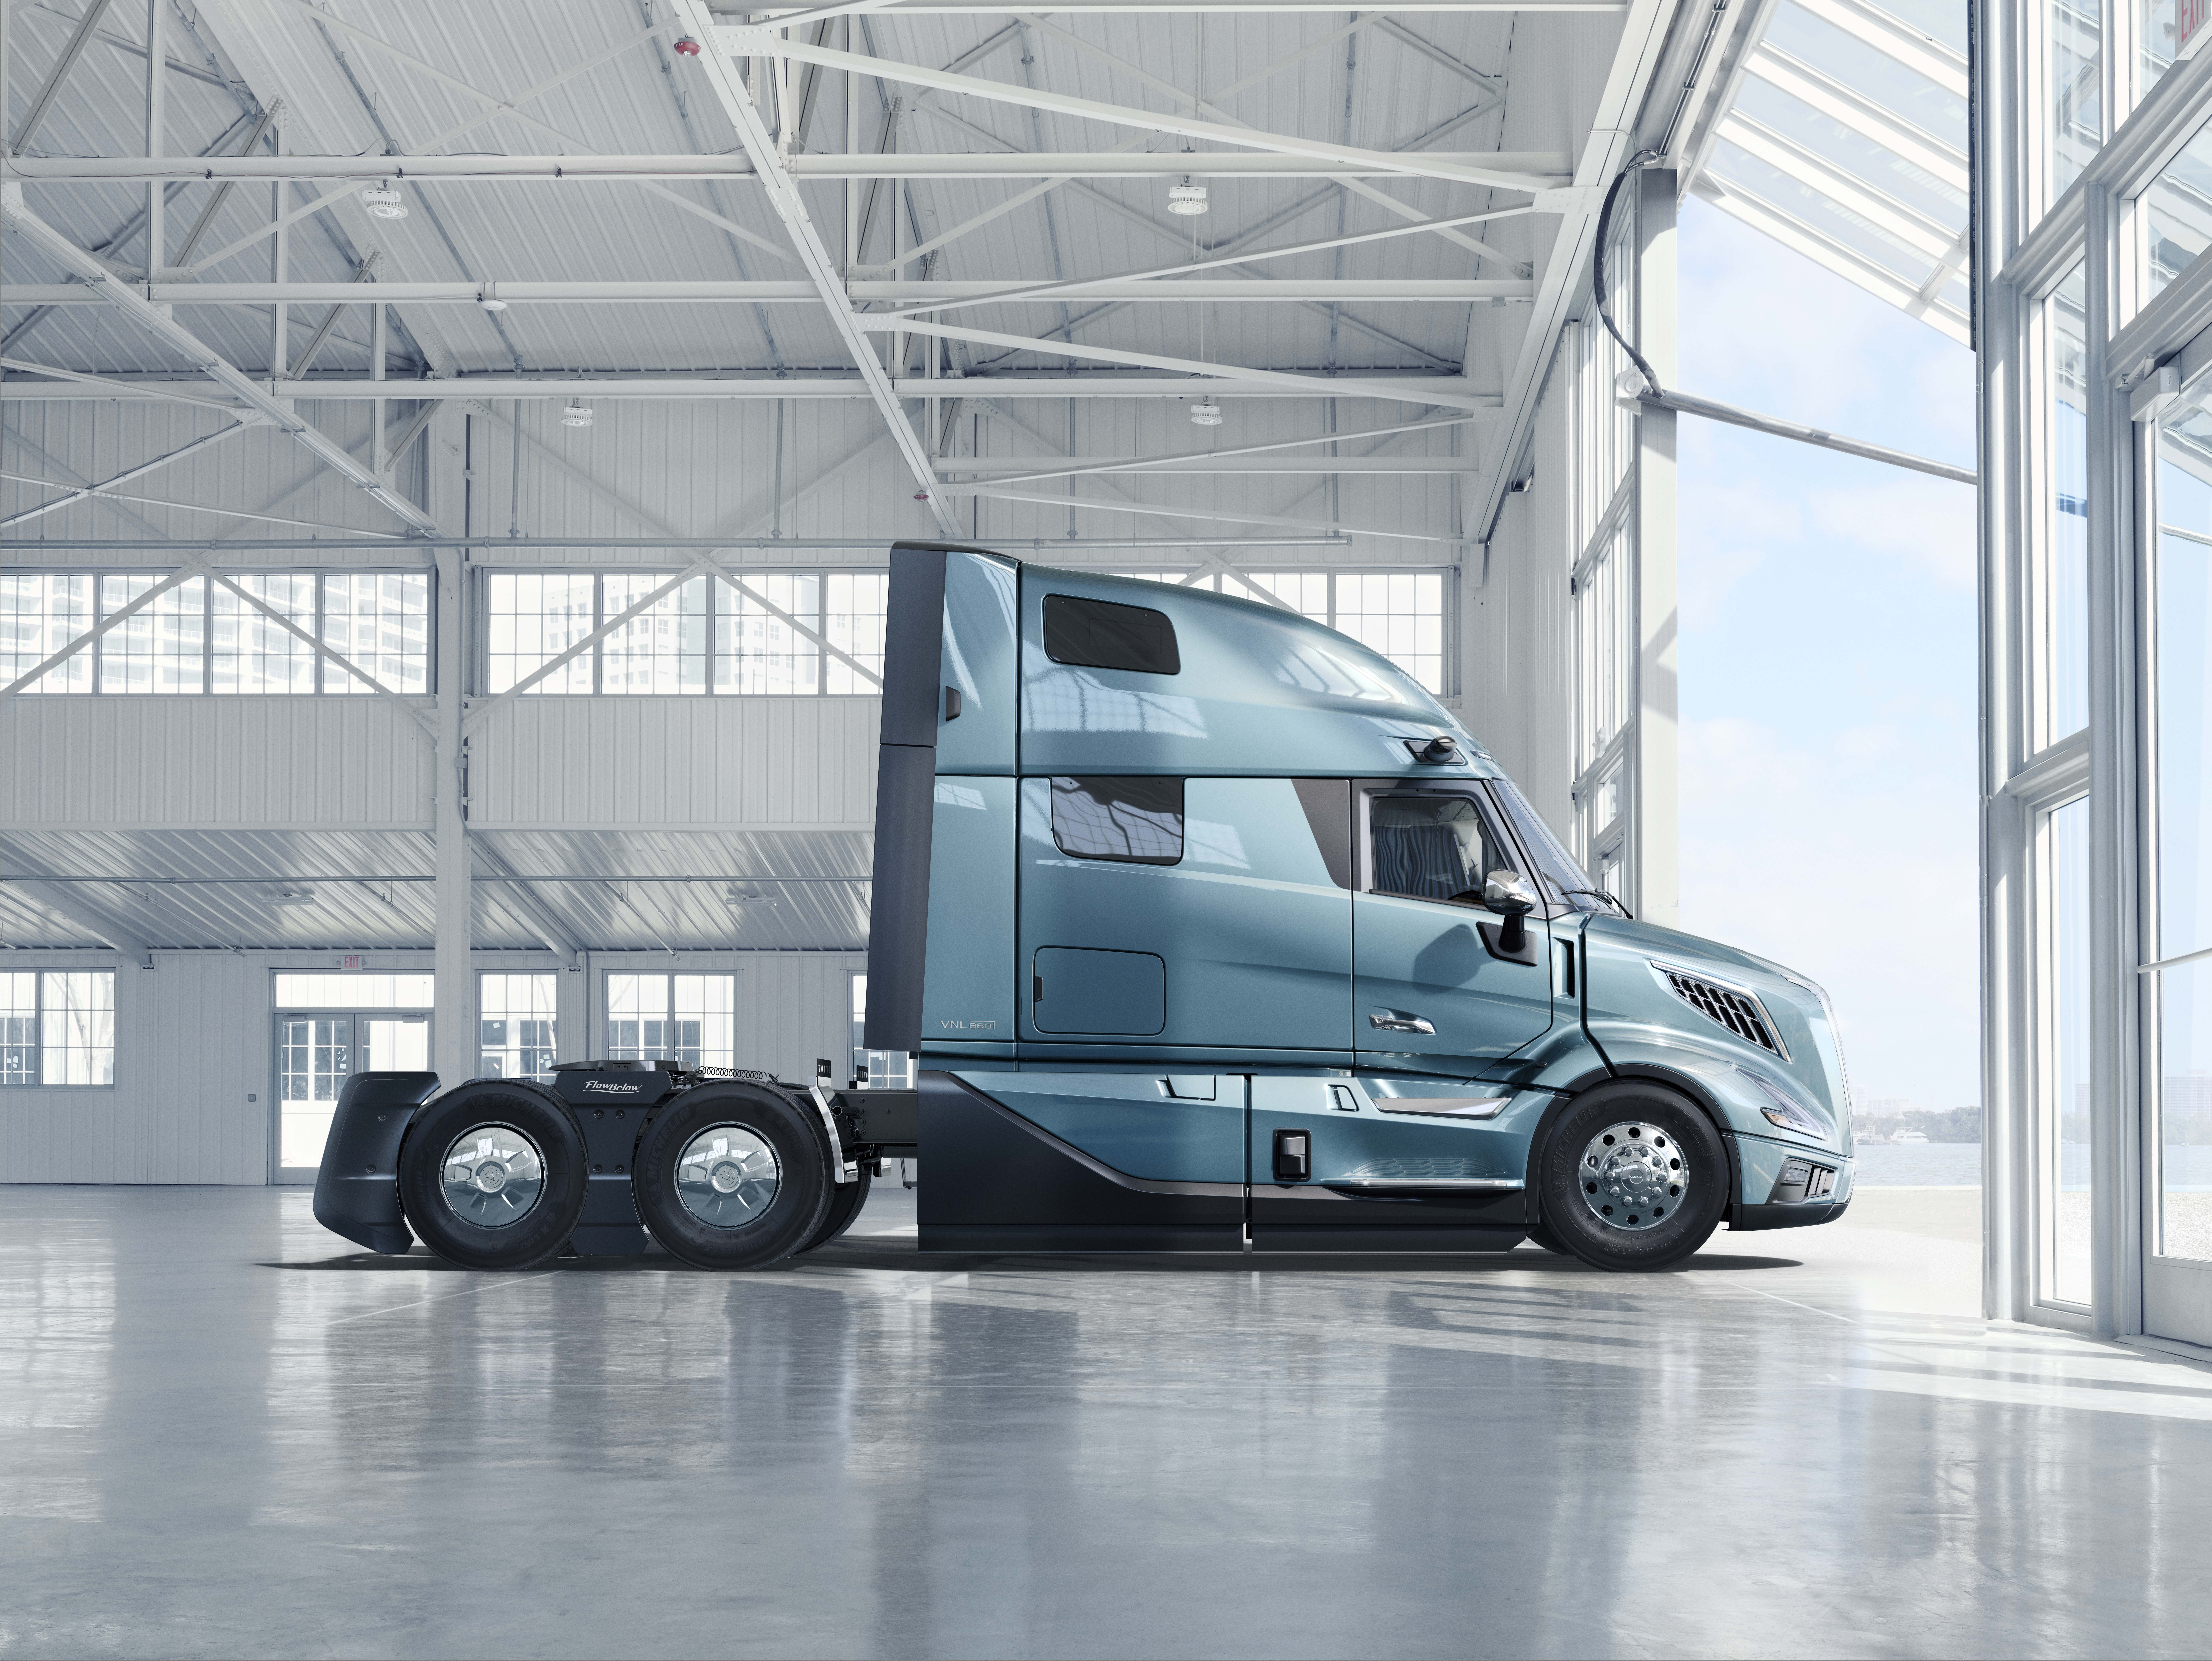 All new Volvo trucks are being fueled with Hydrotreated Vegetable Oil, a renewable diesel fuel, at the Volvo Trucks New River Valley Plant. This fueling with HVO includes the all-new Volvo VNL that will begin production later this summer.